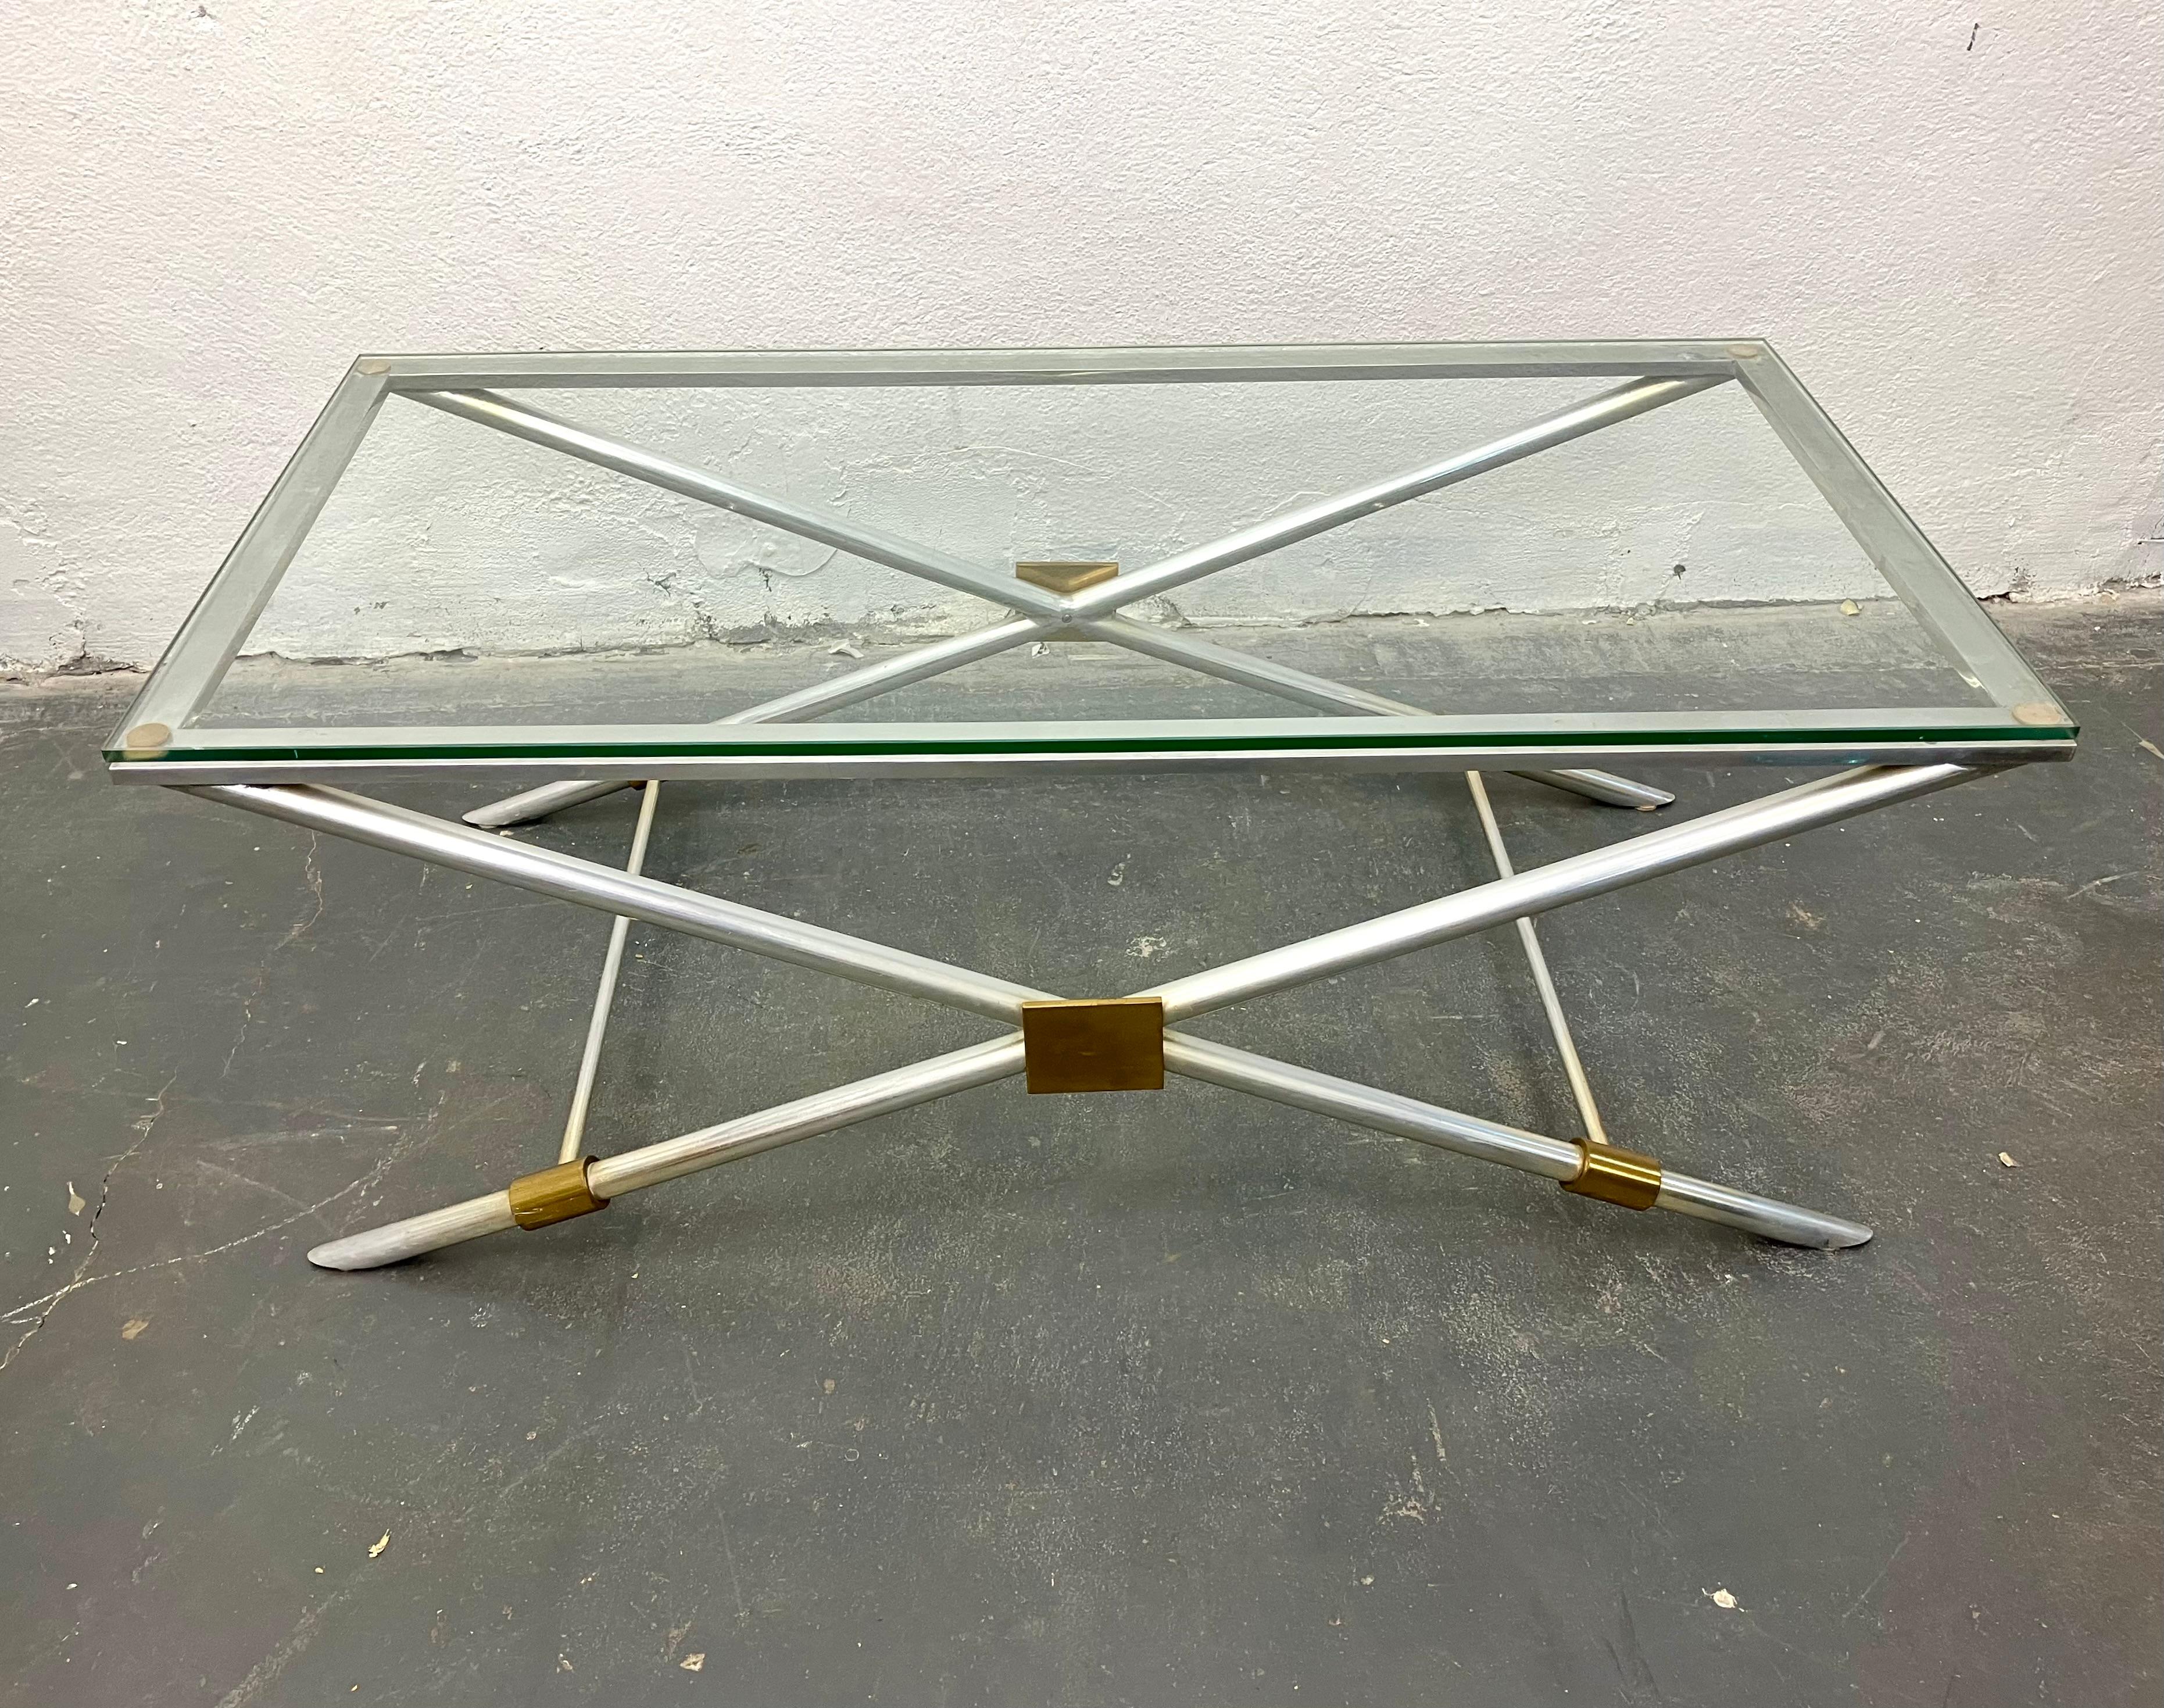 Brass-mounted polished aluminum with 1/2” glass top. Model v-41 from Vesey’s first collection of 1958.